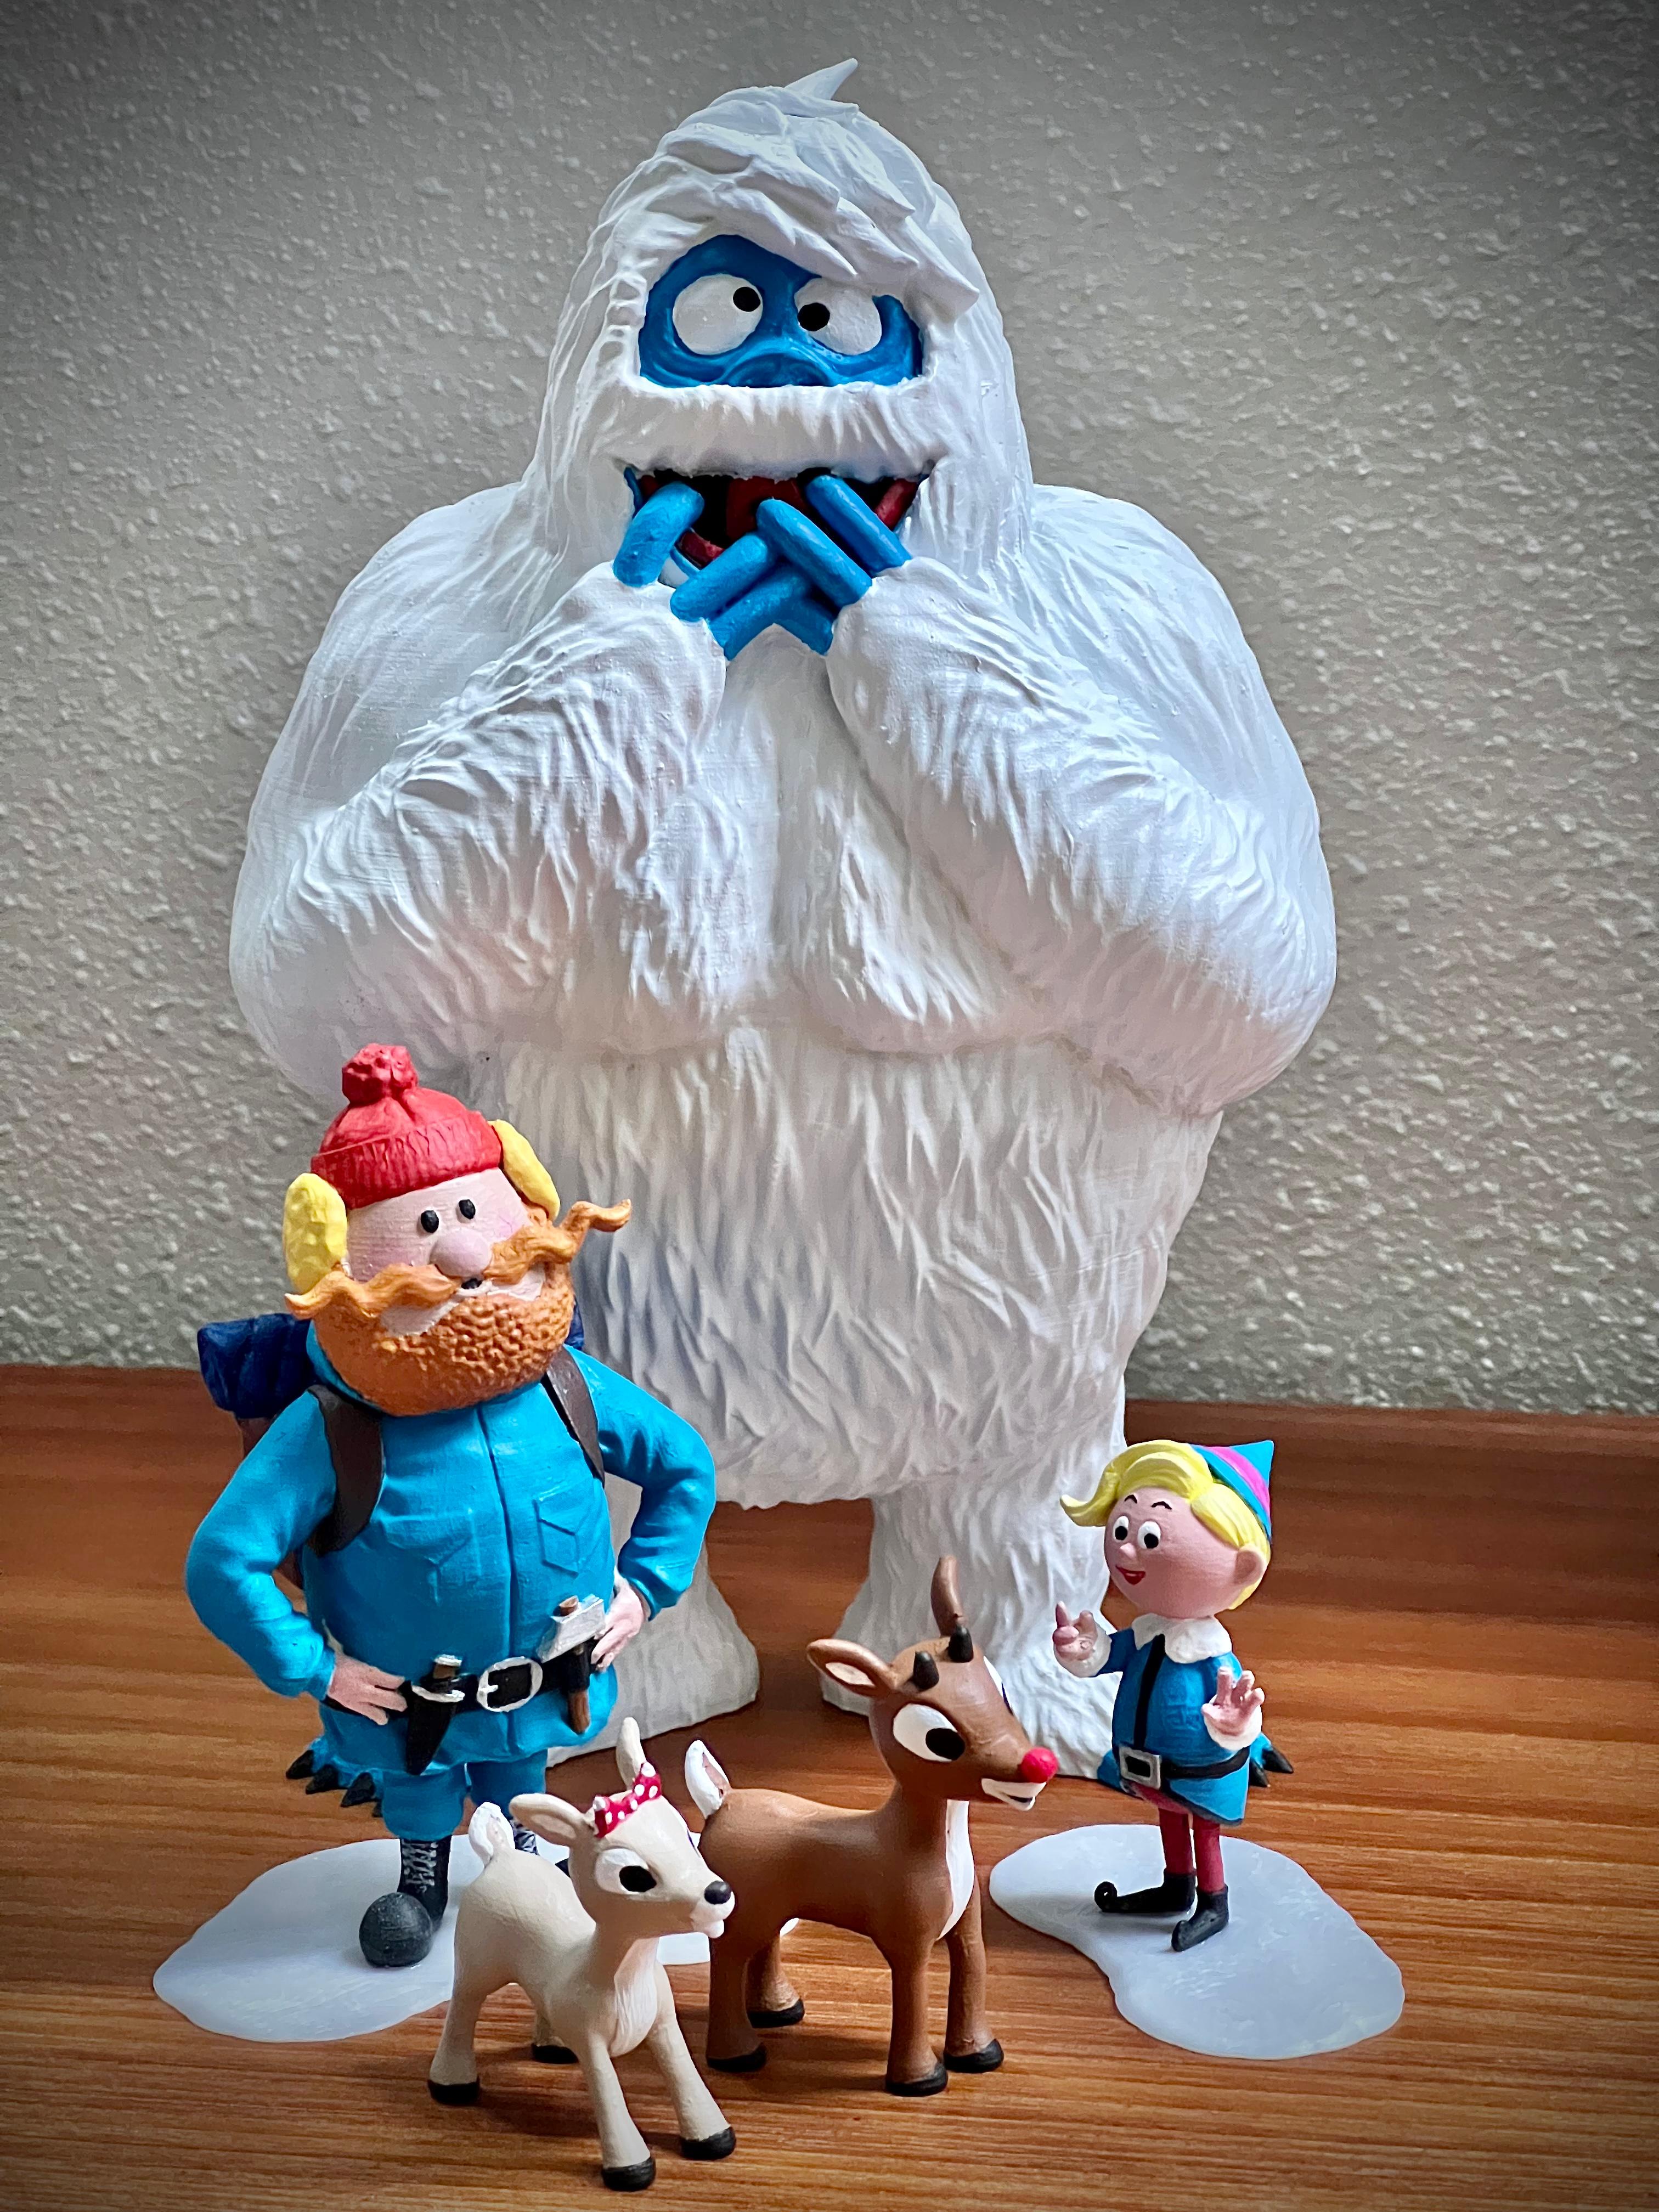 Rudolph (Island of Misfit Toys) - Printed mine at 75% on the Prusa Mini+. Excellent models, easy to paint, loads of nostalgia! Thanks so much for making them available.

I added a 2mm organic-looking ice terrain base to Yukon and Hermey for stabilty. - 3d model